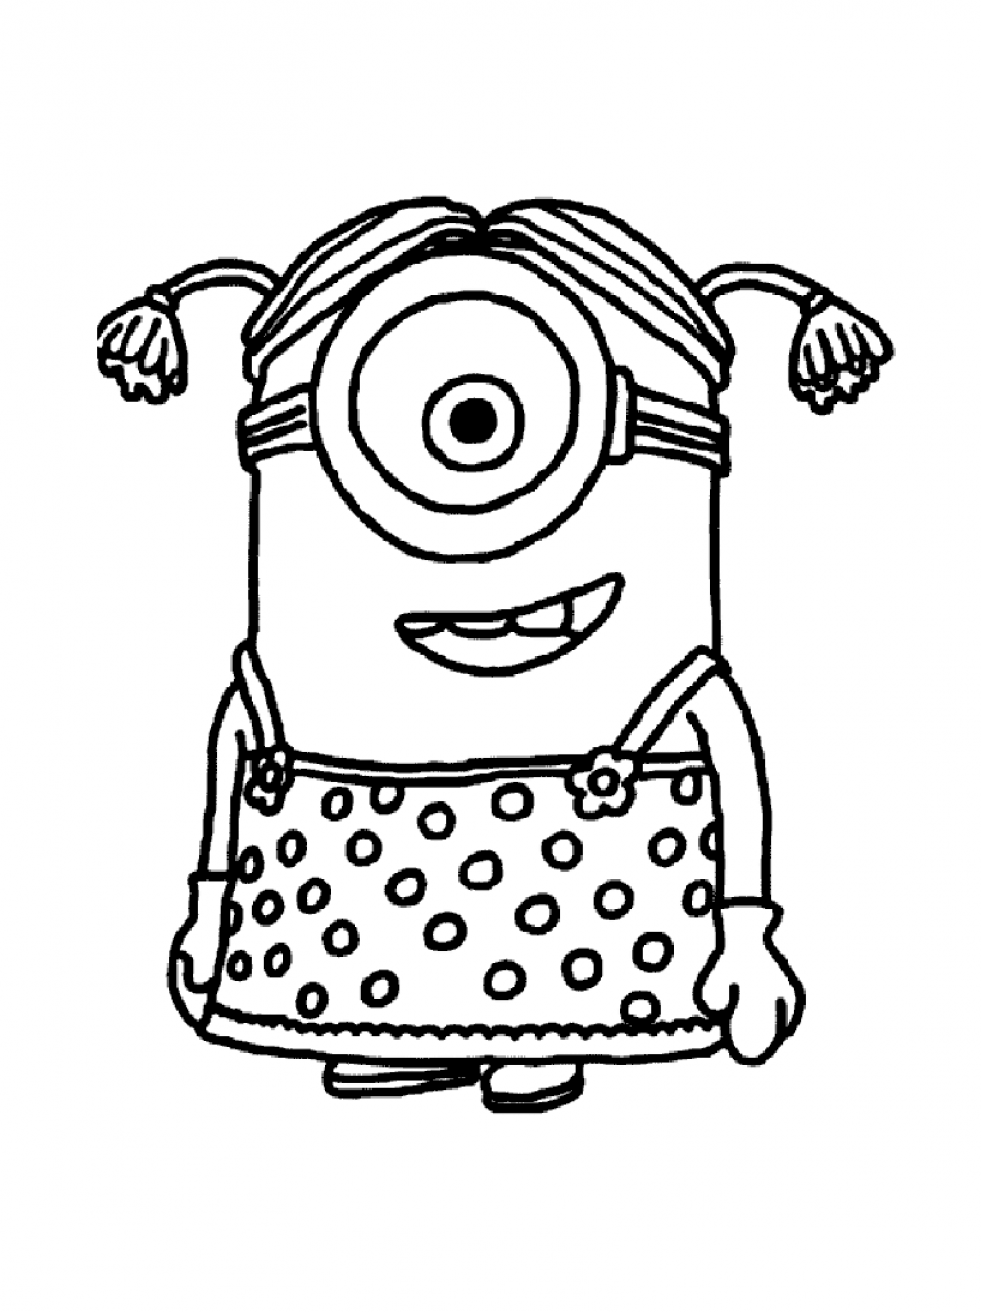 Minions free to color for children - Minions Kids Coloring Pages - SheetalColor.com